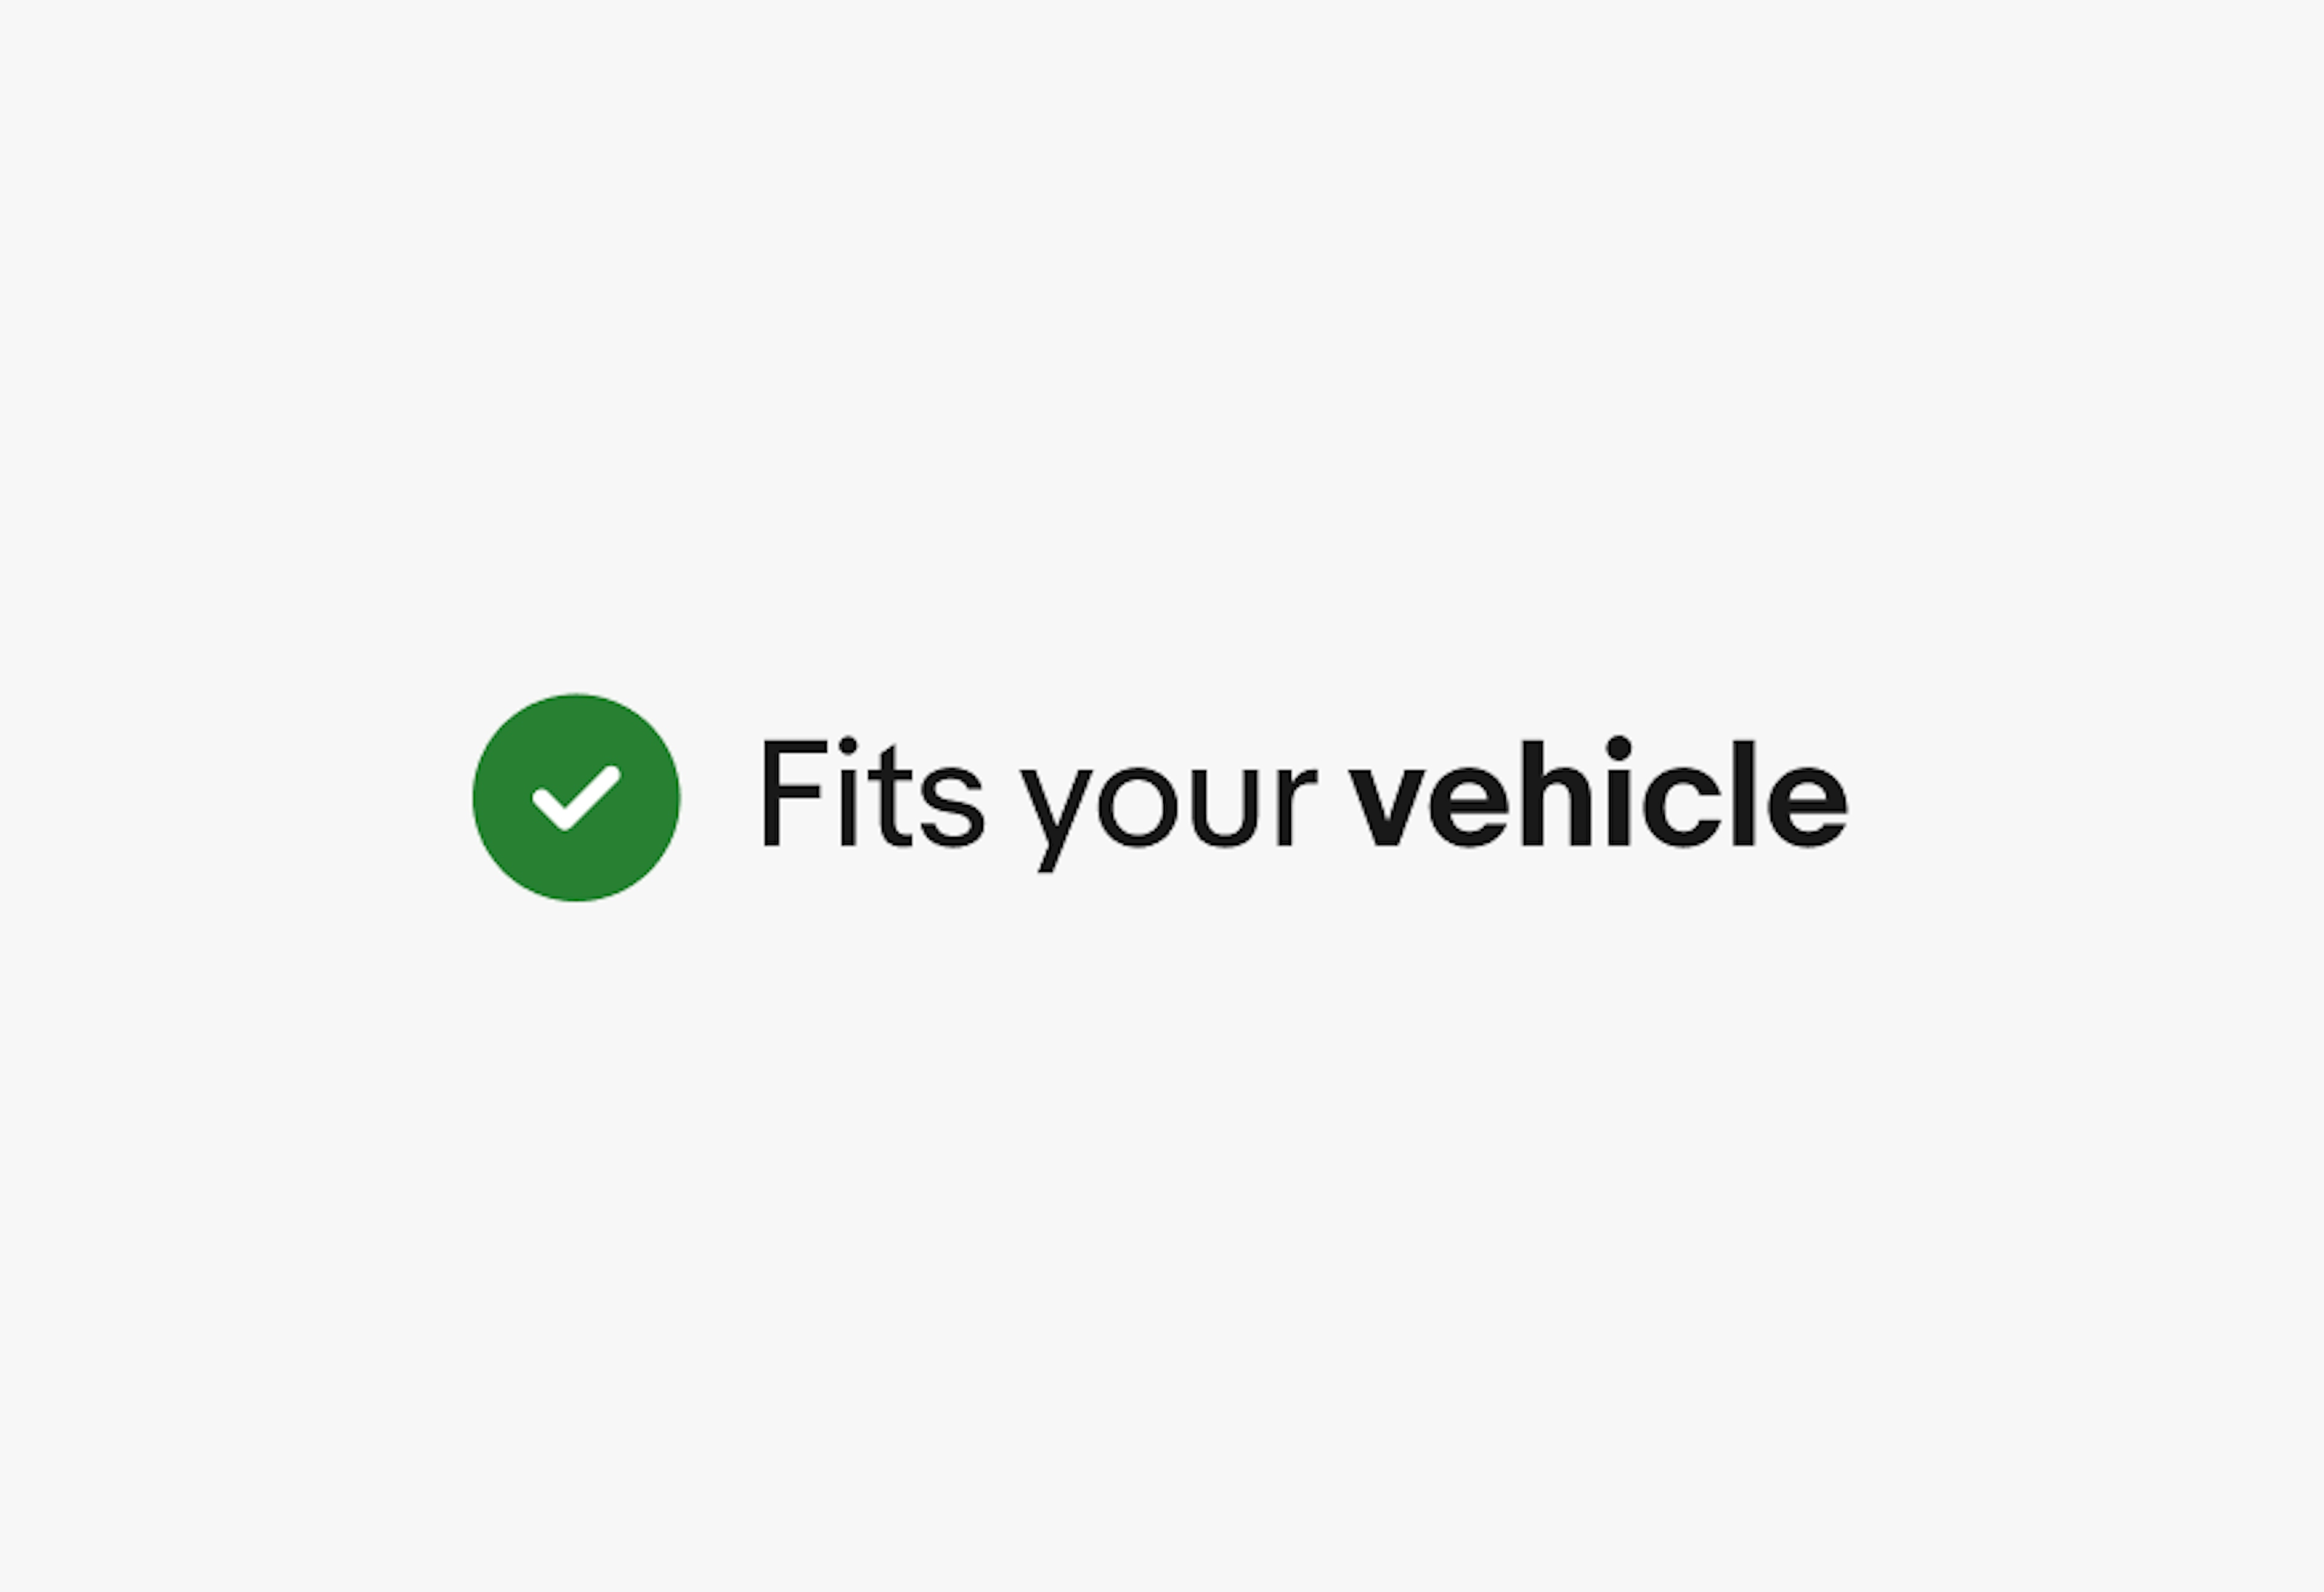 A green filled confirmation checkmark icon next to the text “Fits your vehicle”, but “vehicle” is bolded.